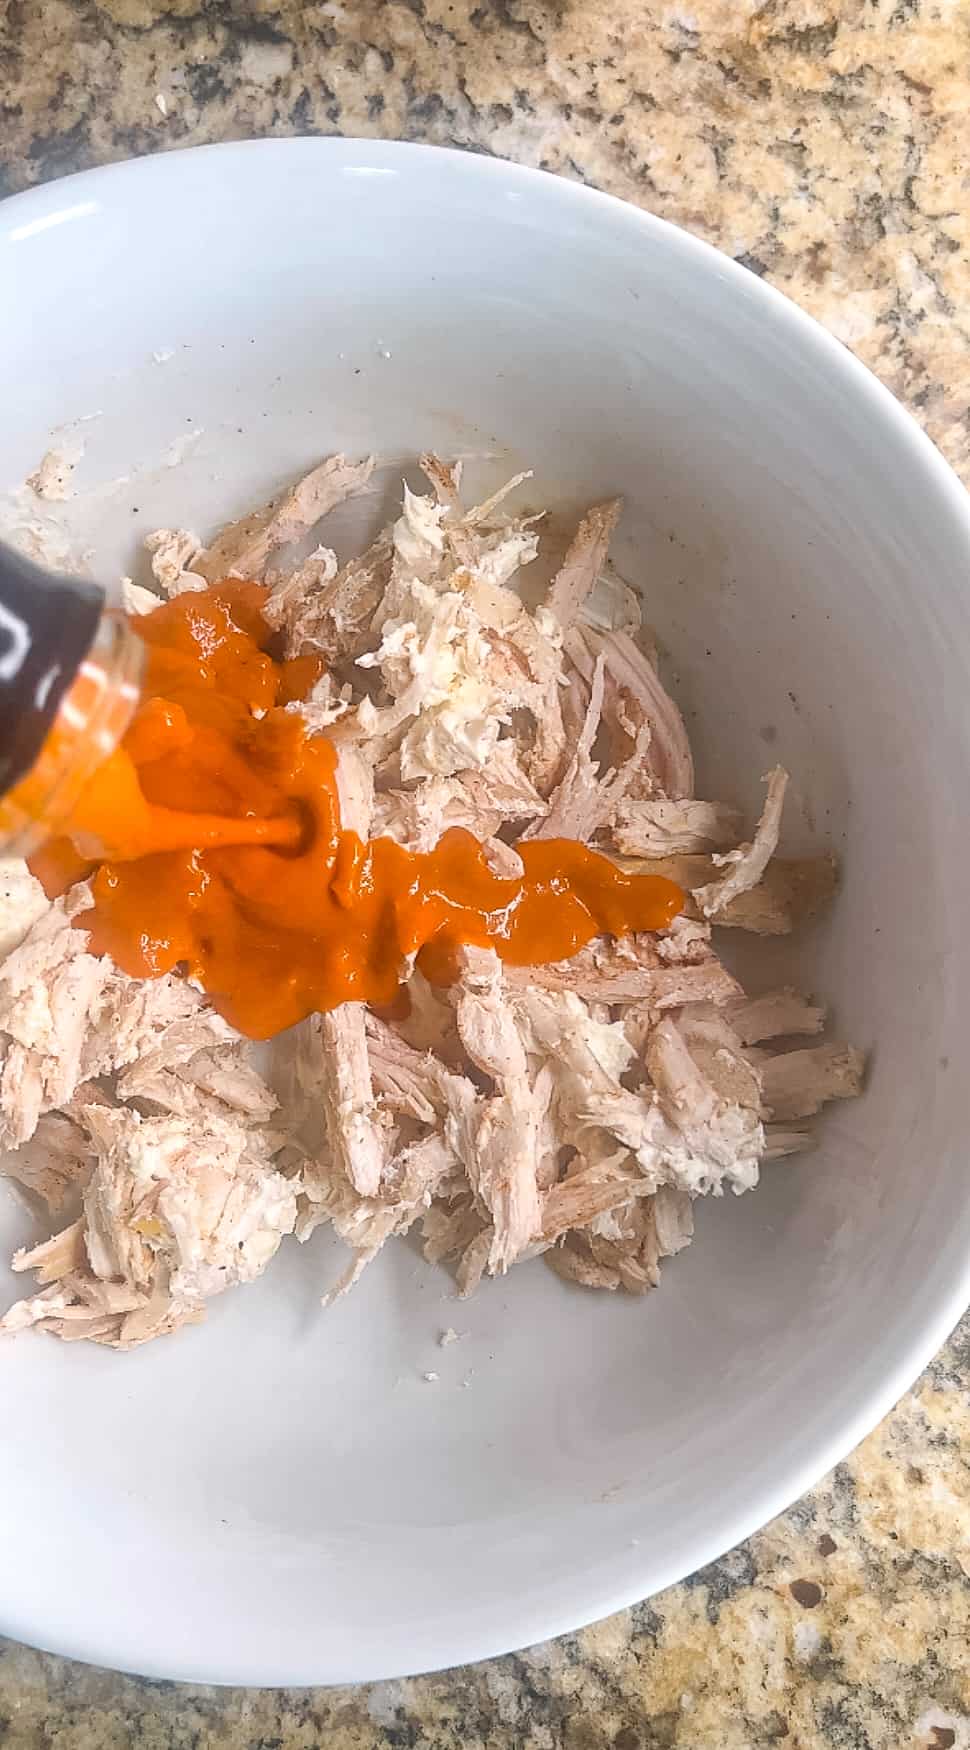 Buffalo sauce being added to shredded chicken and cream cheese mixture.